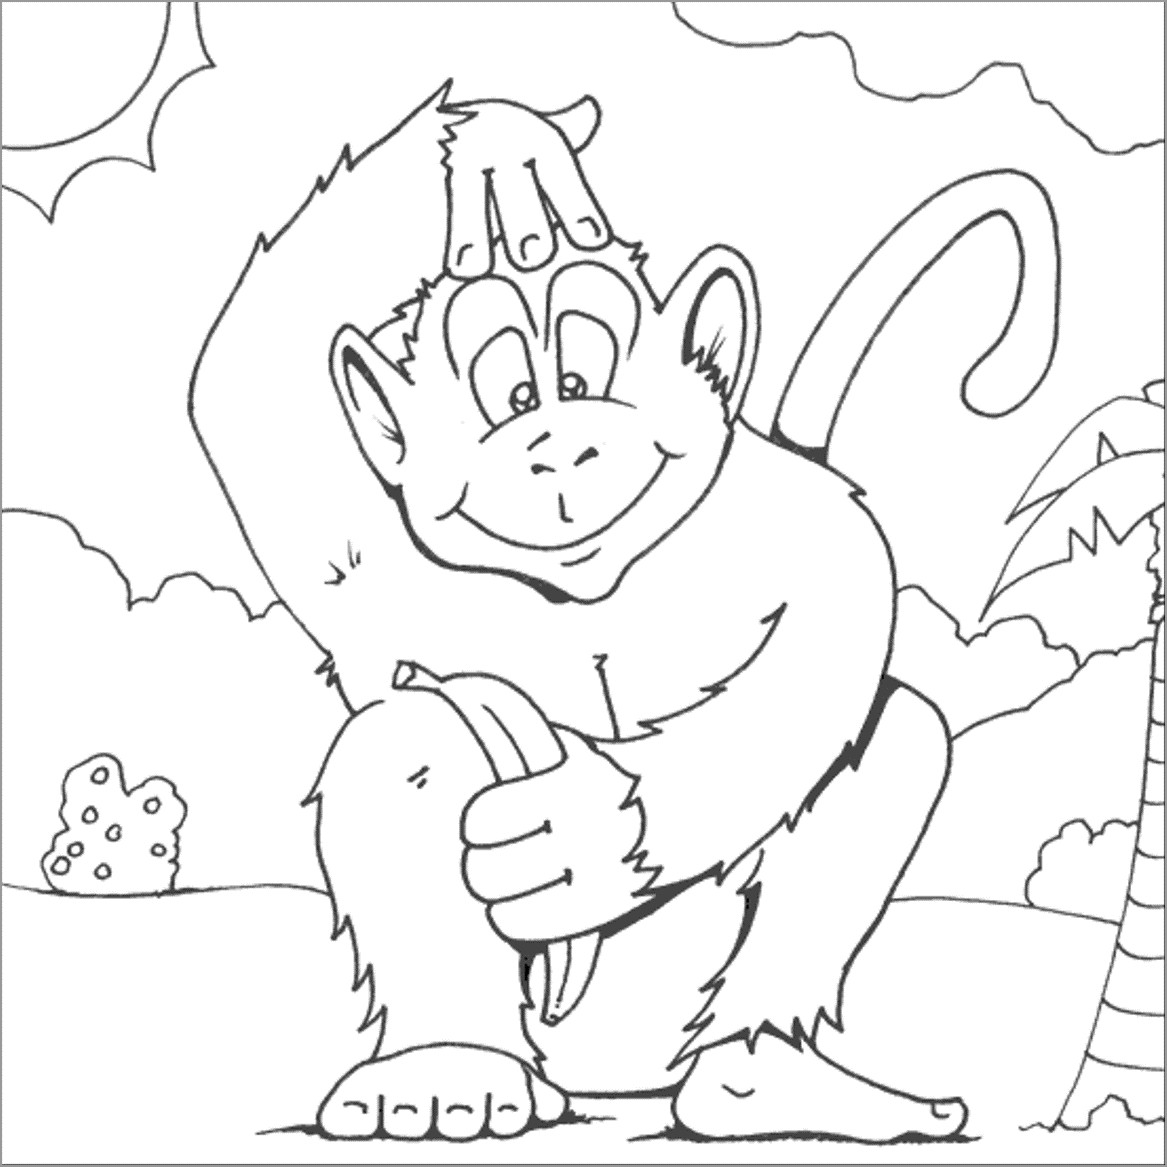 Monkey with Banana Coloring Page